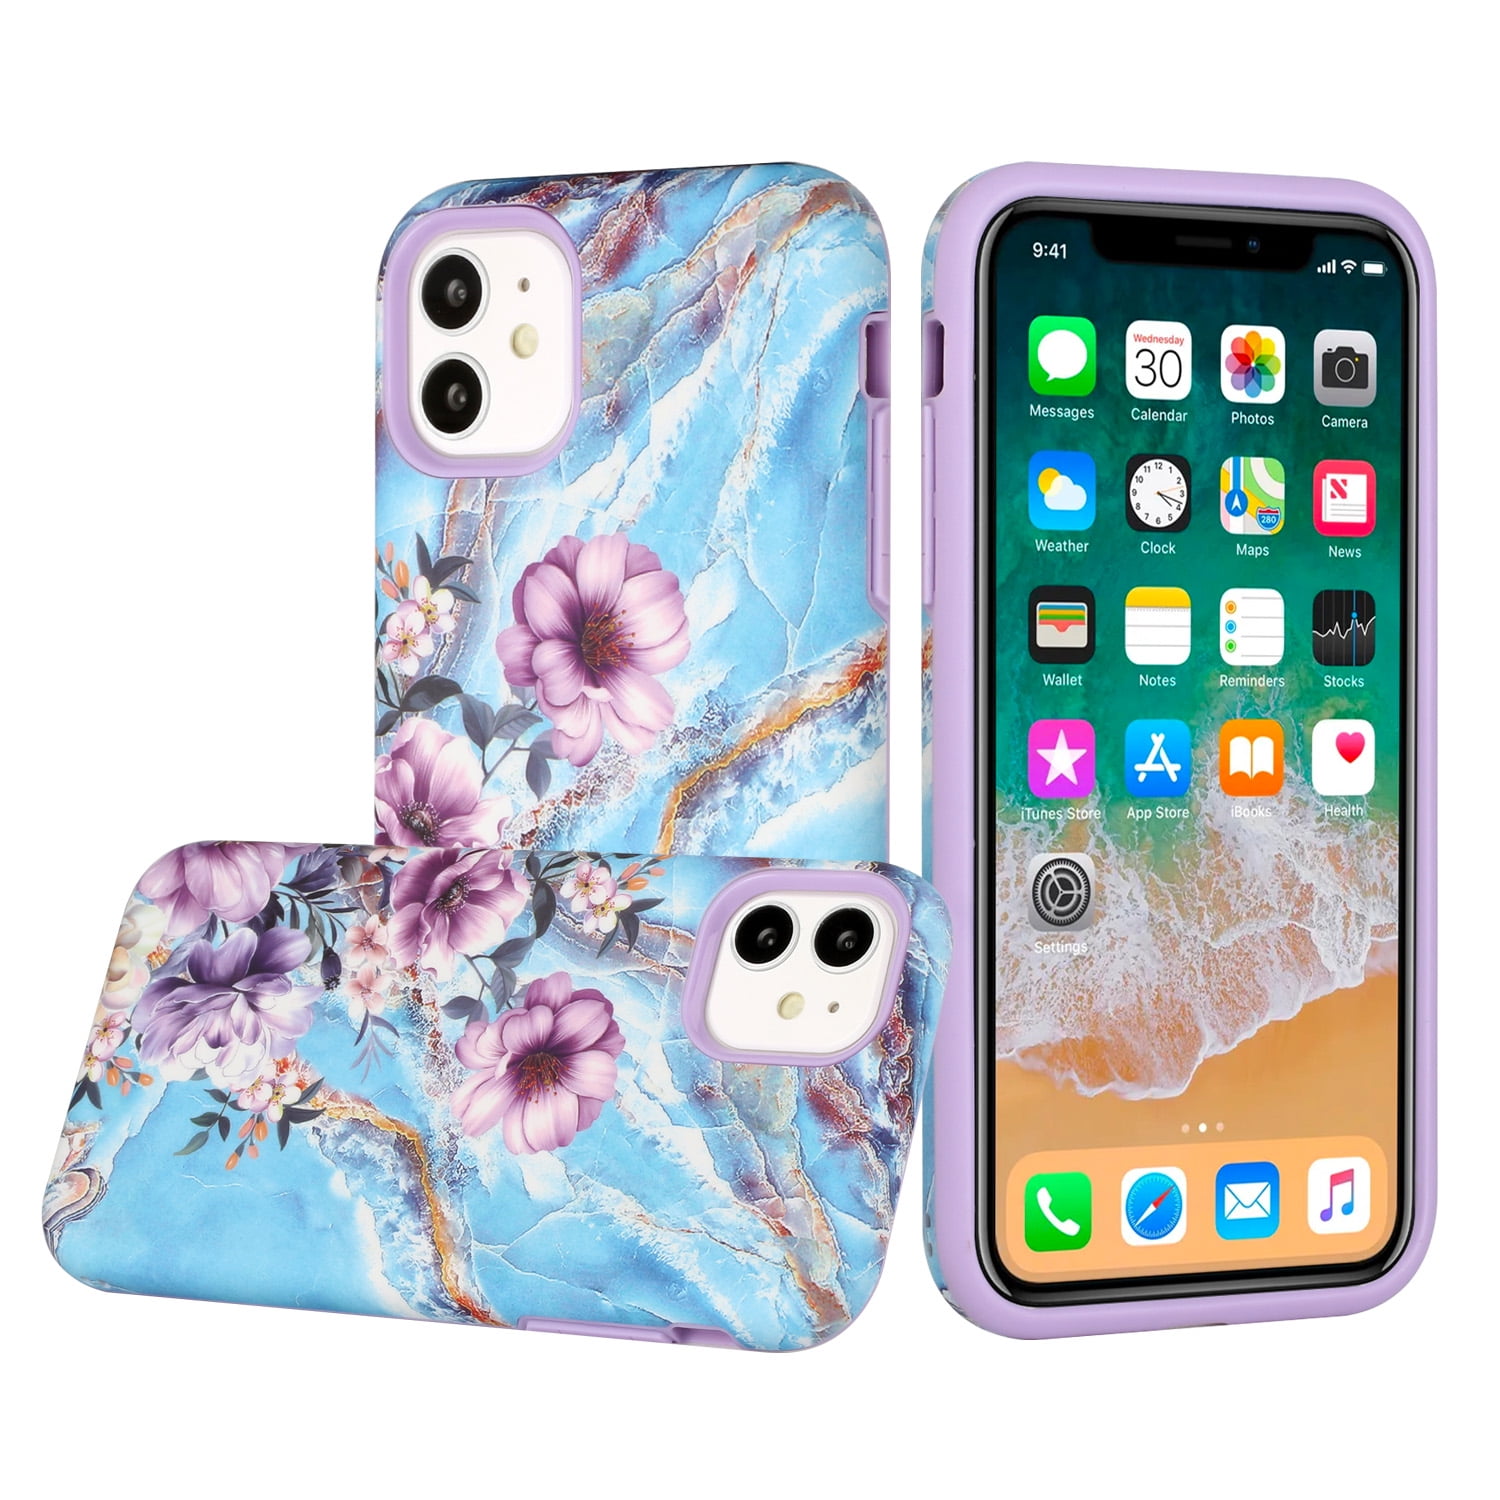 For Apple iPhone 11 (6.1) Pattern Fashion Design Chromed Edge IMD with  Ring Kickstand Hybrid TPU Hard Back Case Cover fit iPhone 11 - Blue Marble  